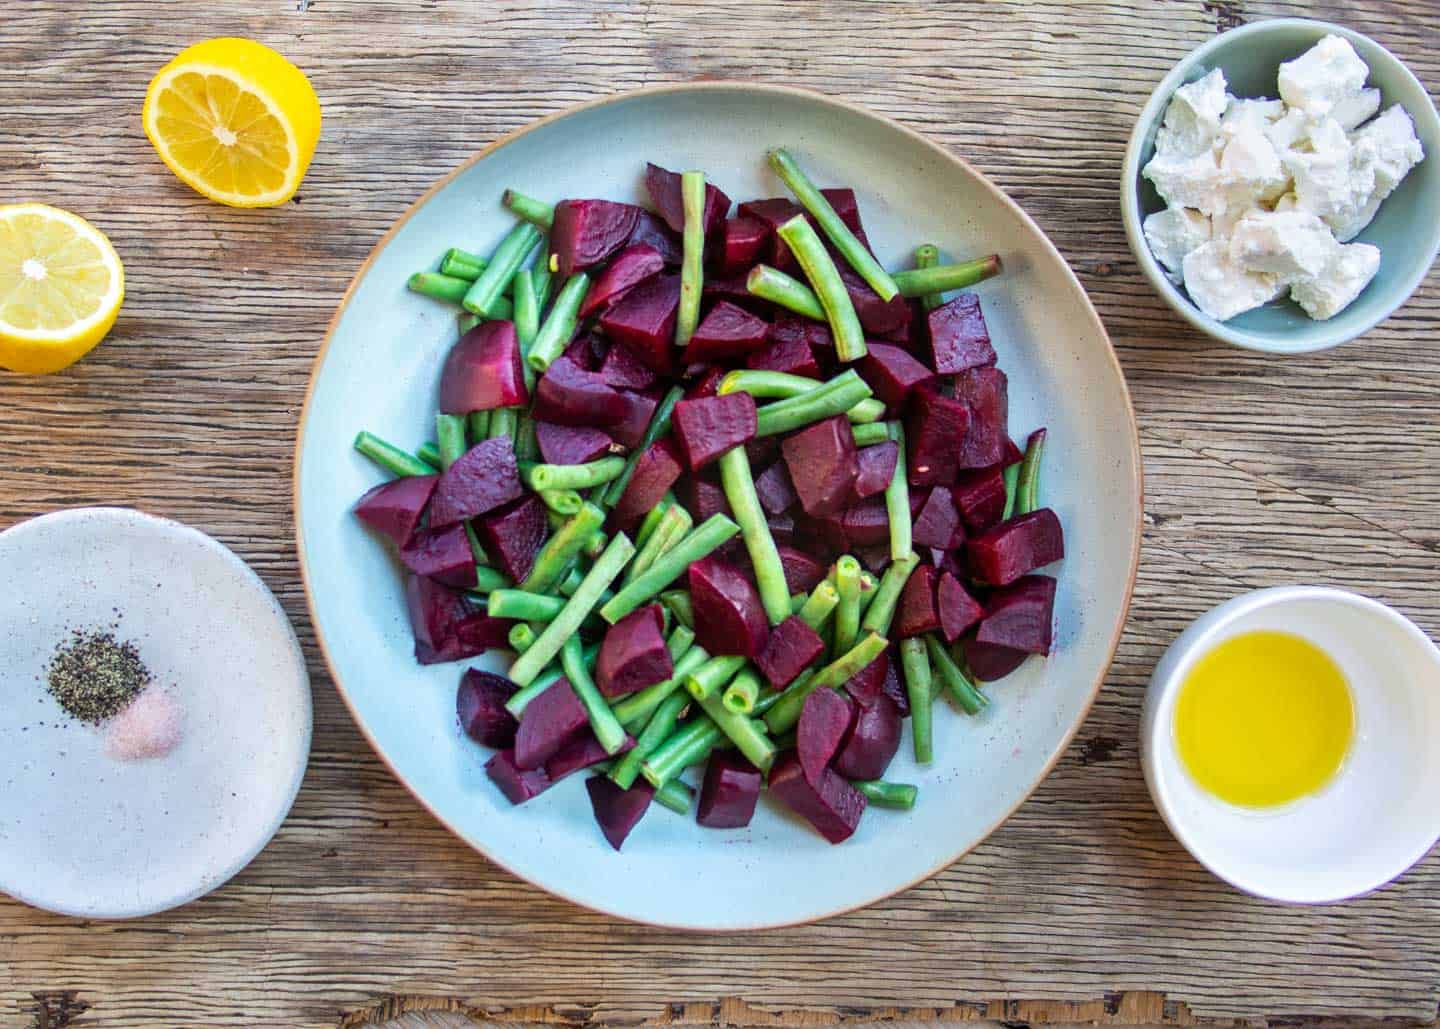 Steamed beets and beans in blue bowl, with dressings on the side